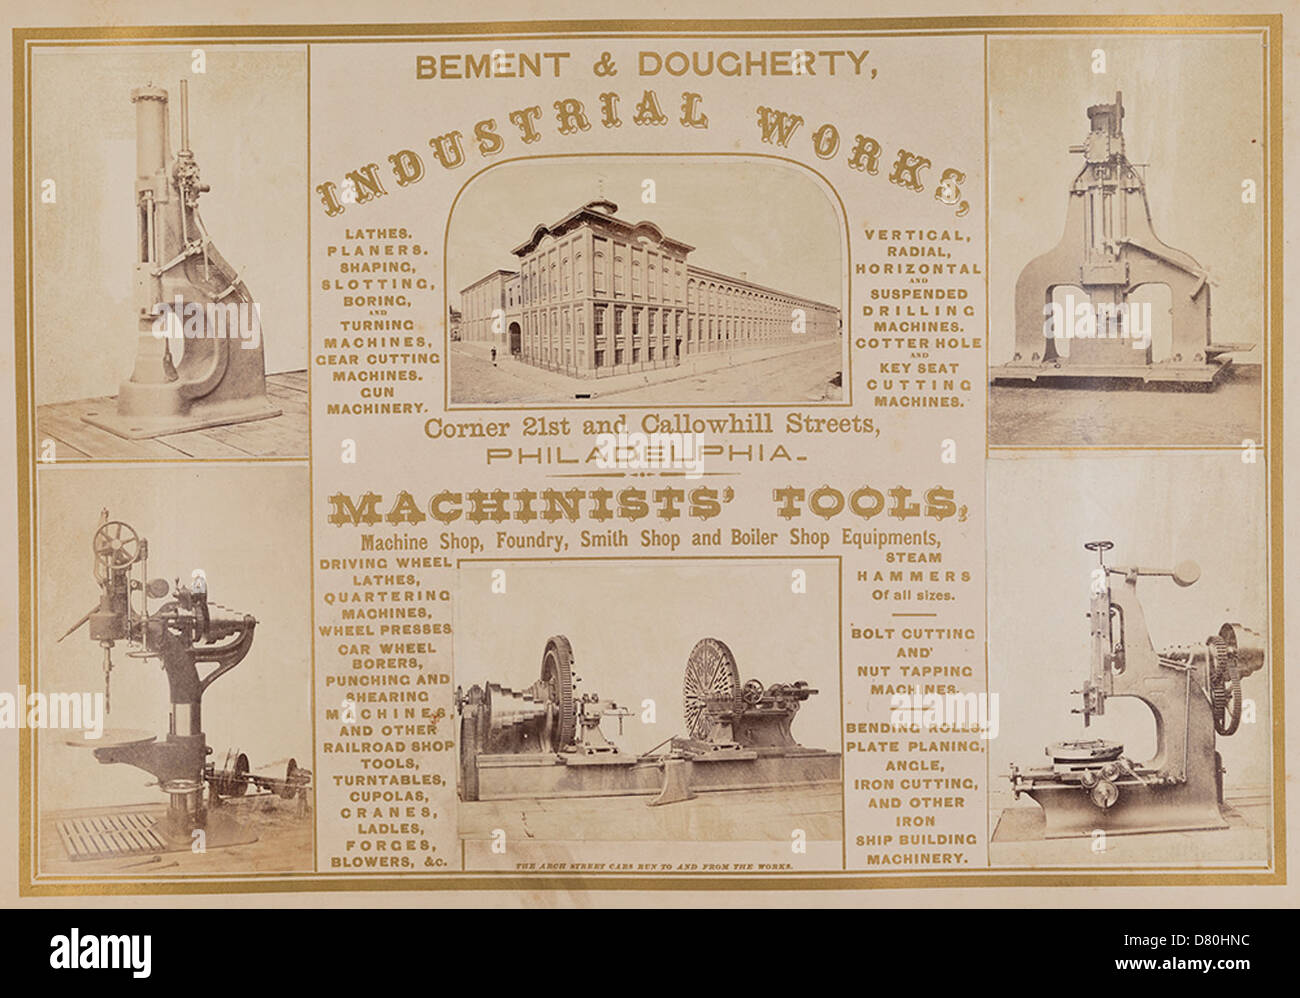 Bement & Dougherty, Industrial Works, Machinists' Tools Stock Photo